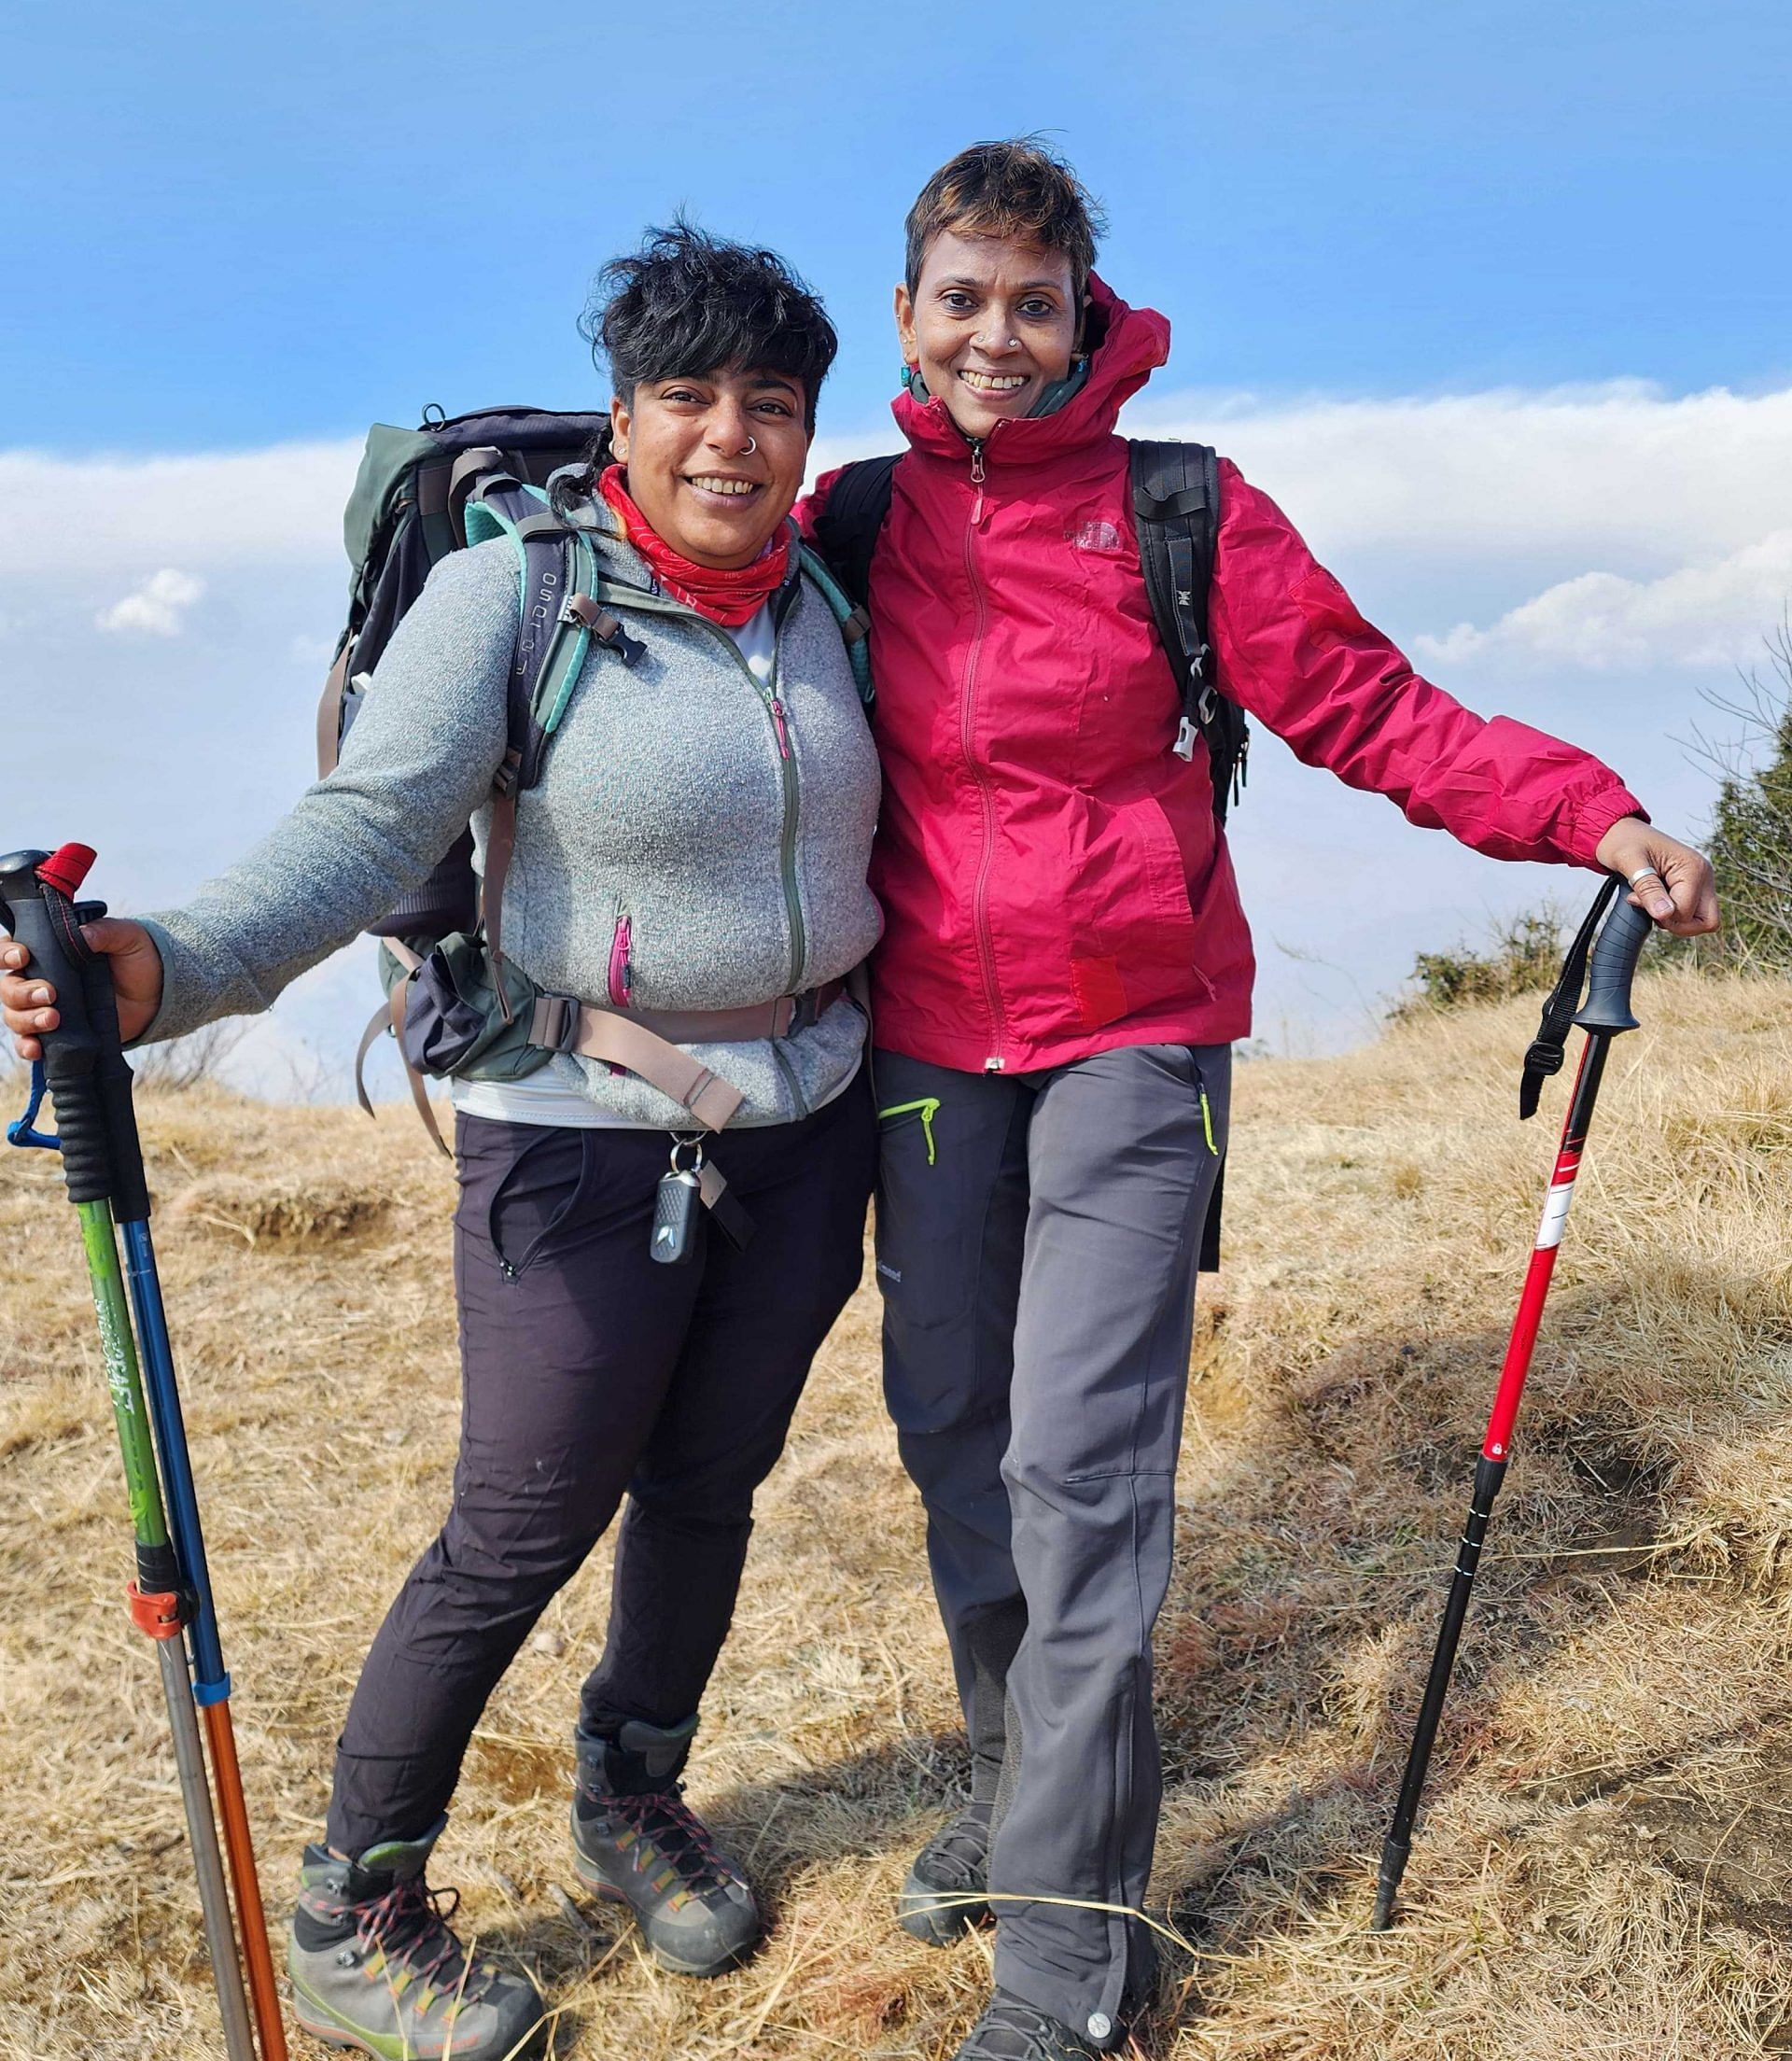 Anusha Subramanian (left) and Guneet Puri (right) conduct ‘inclusive treks’ together. They curate trips for persons with disabilities as well as hikes for older people. | By special arrangement